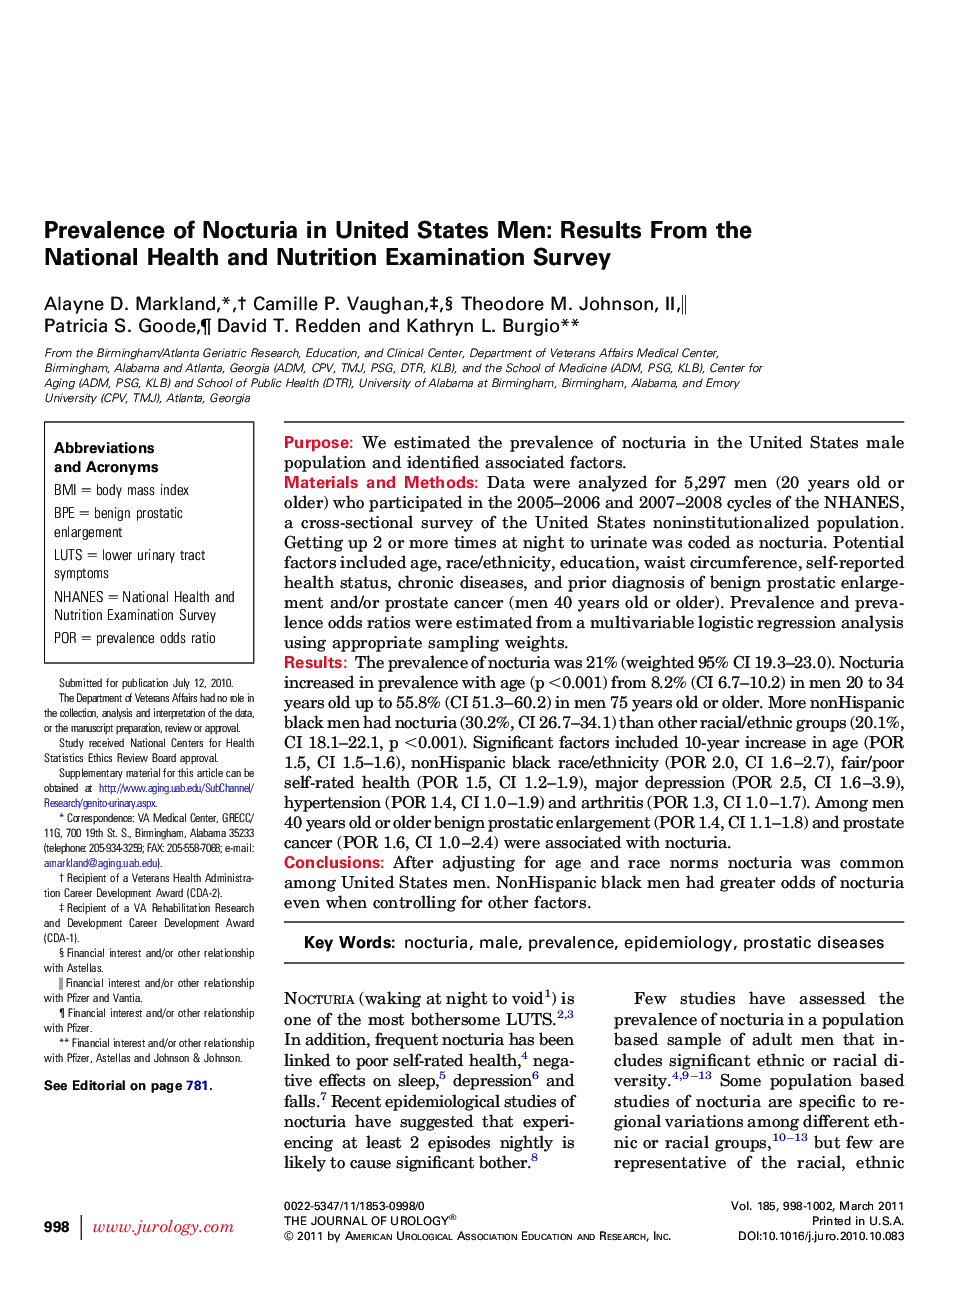 Prevalence of Nocturia in United States Men: Results From the National Health and Nutrition Examination Survey 